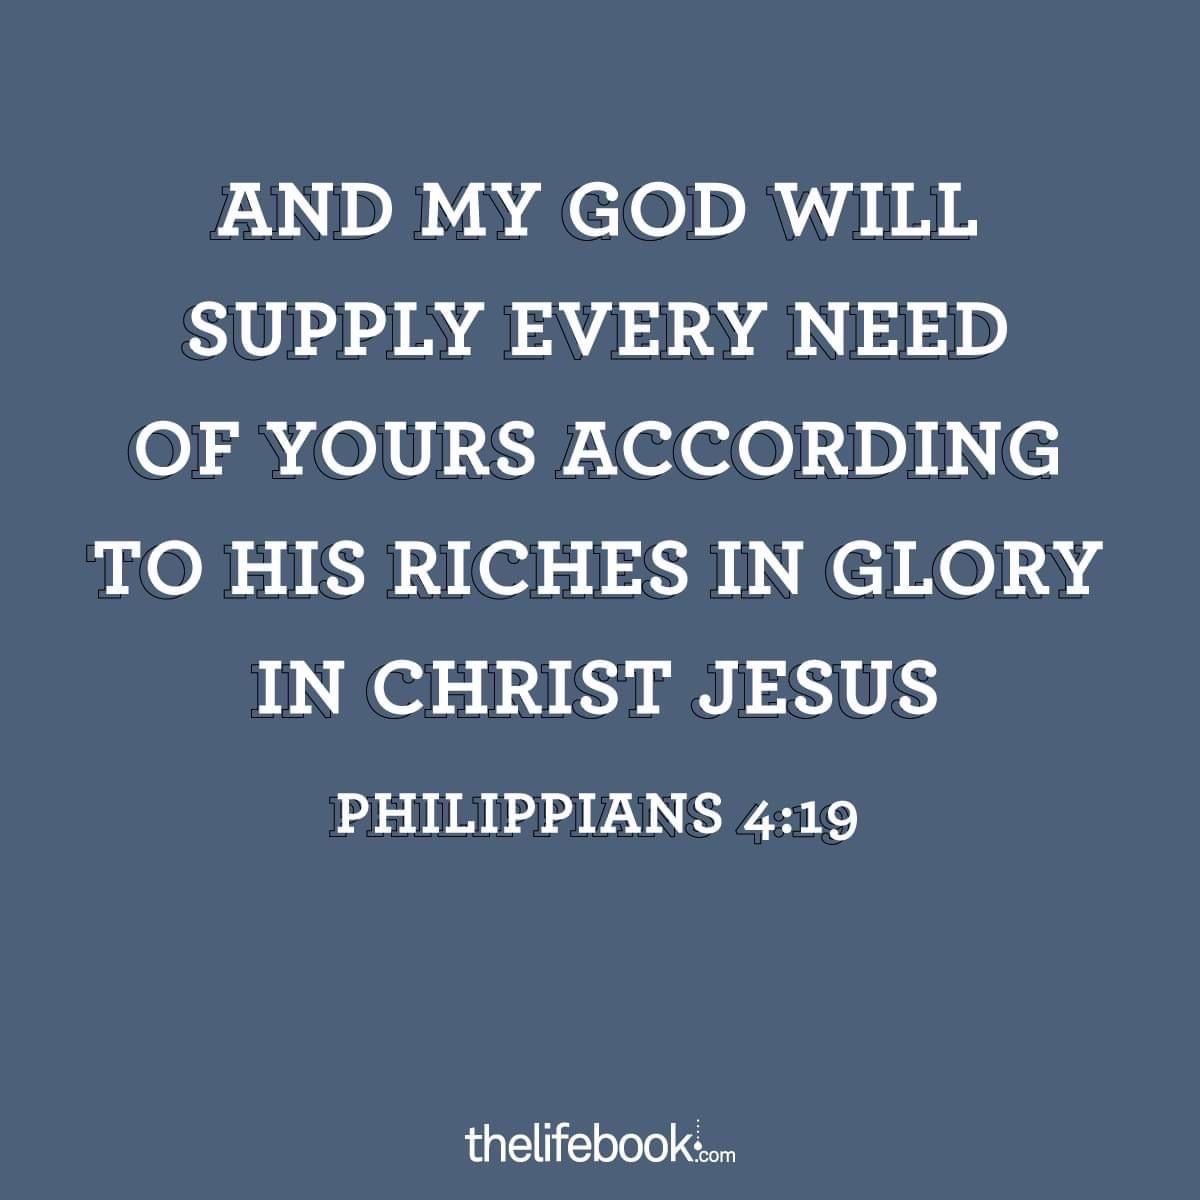 'AND MY GOD WILL SUPPLY EVERY NEED OF YOURS ACCORDING TO HIS RICHES IN GLORY IN CHRIST JESUS PHILIPPIANS 4:19 thelifebook.com'